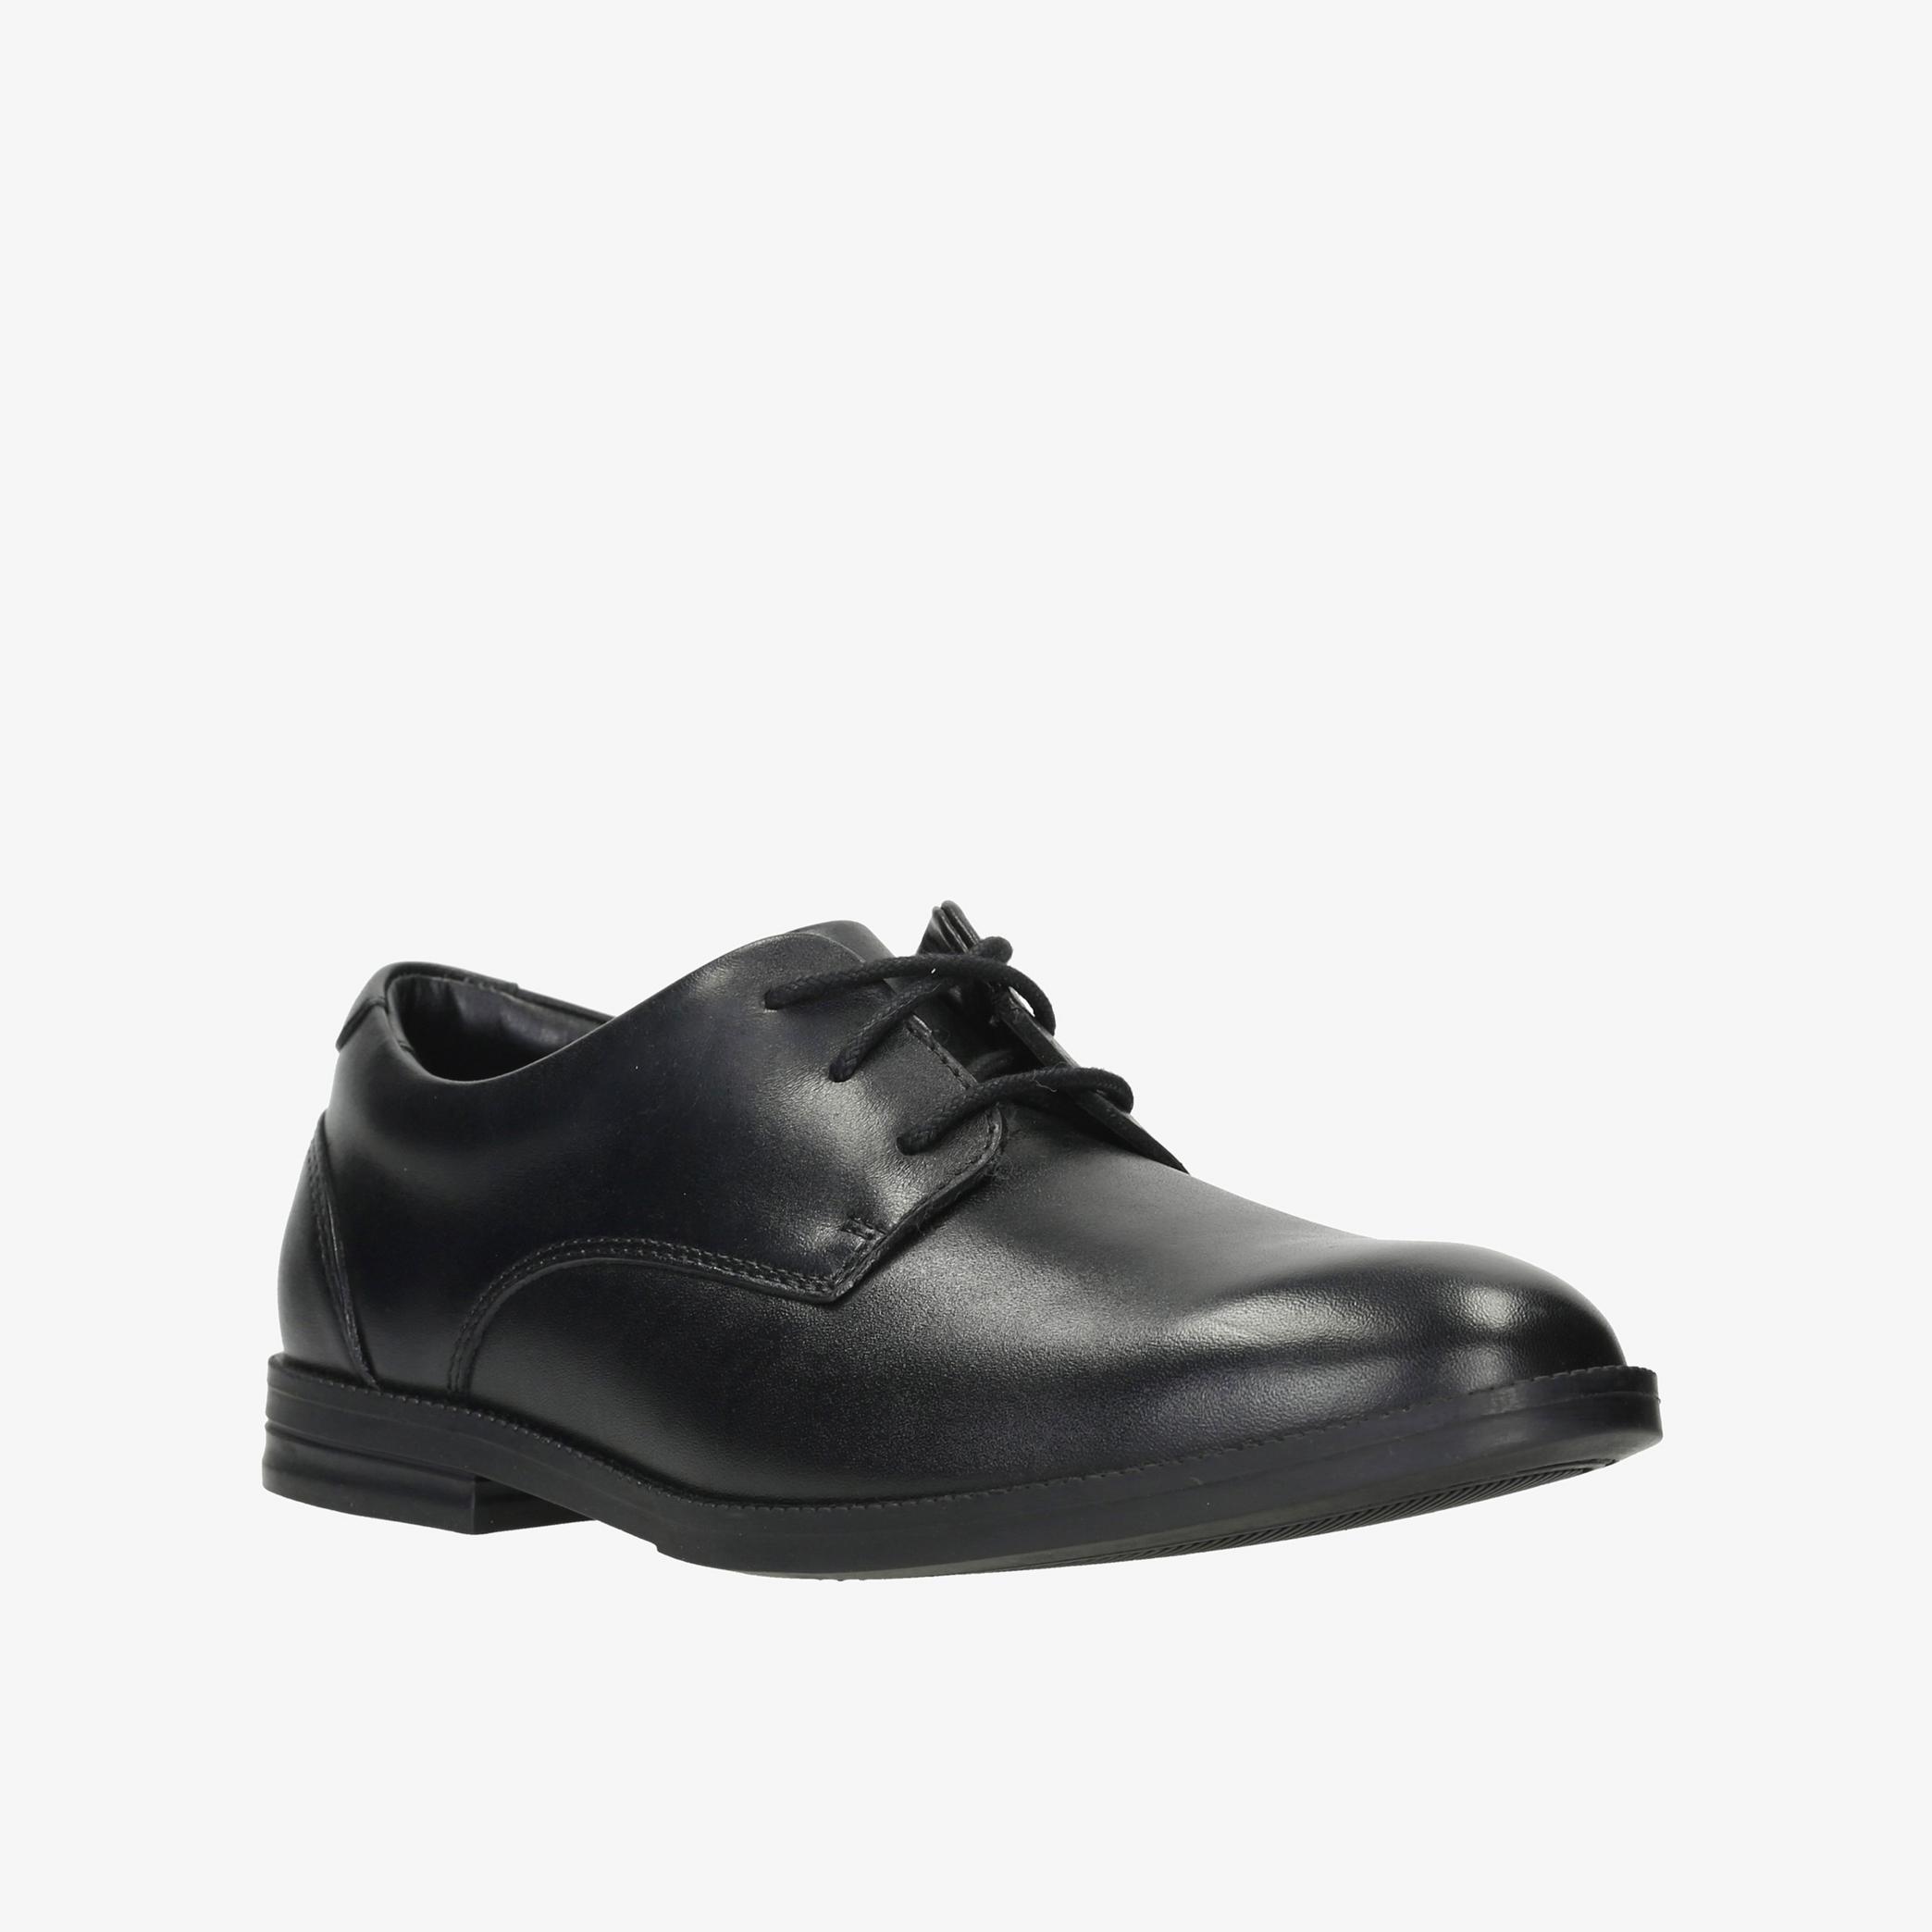 Rufus Edge Youth Black Leather Shoes, view 3 of 6